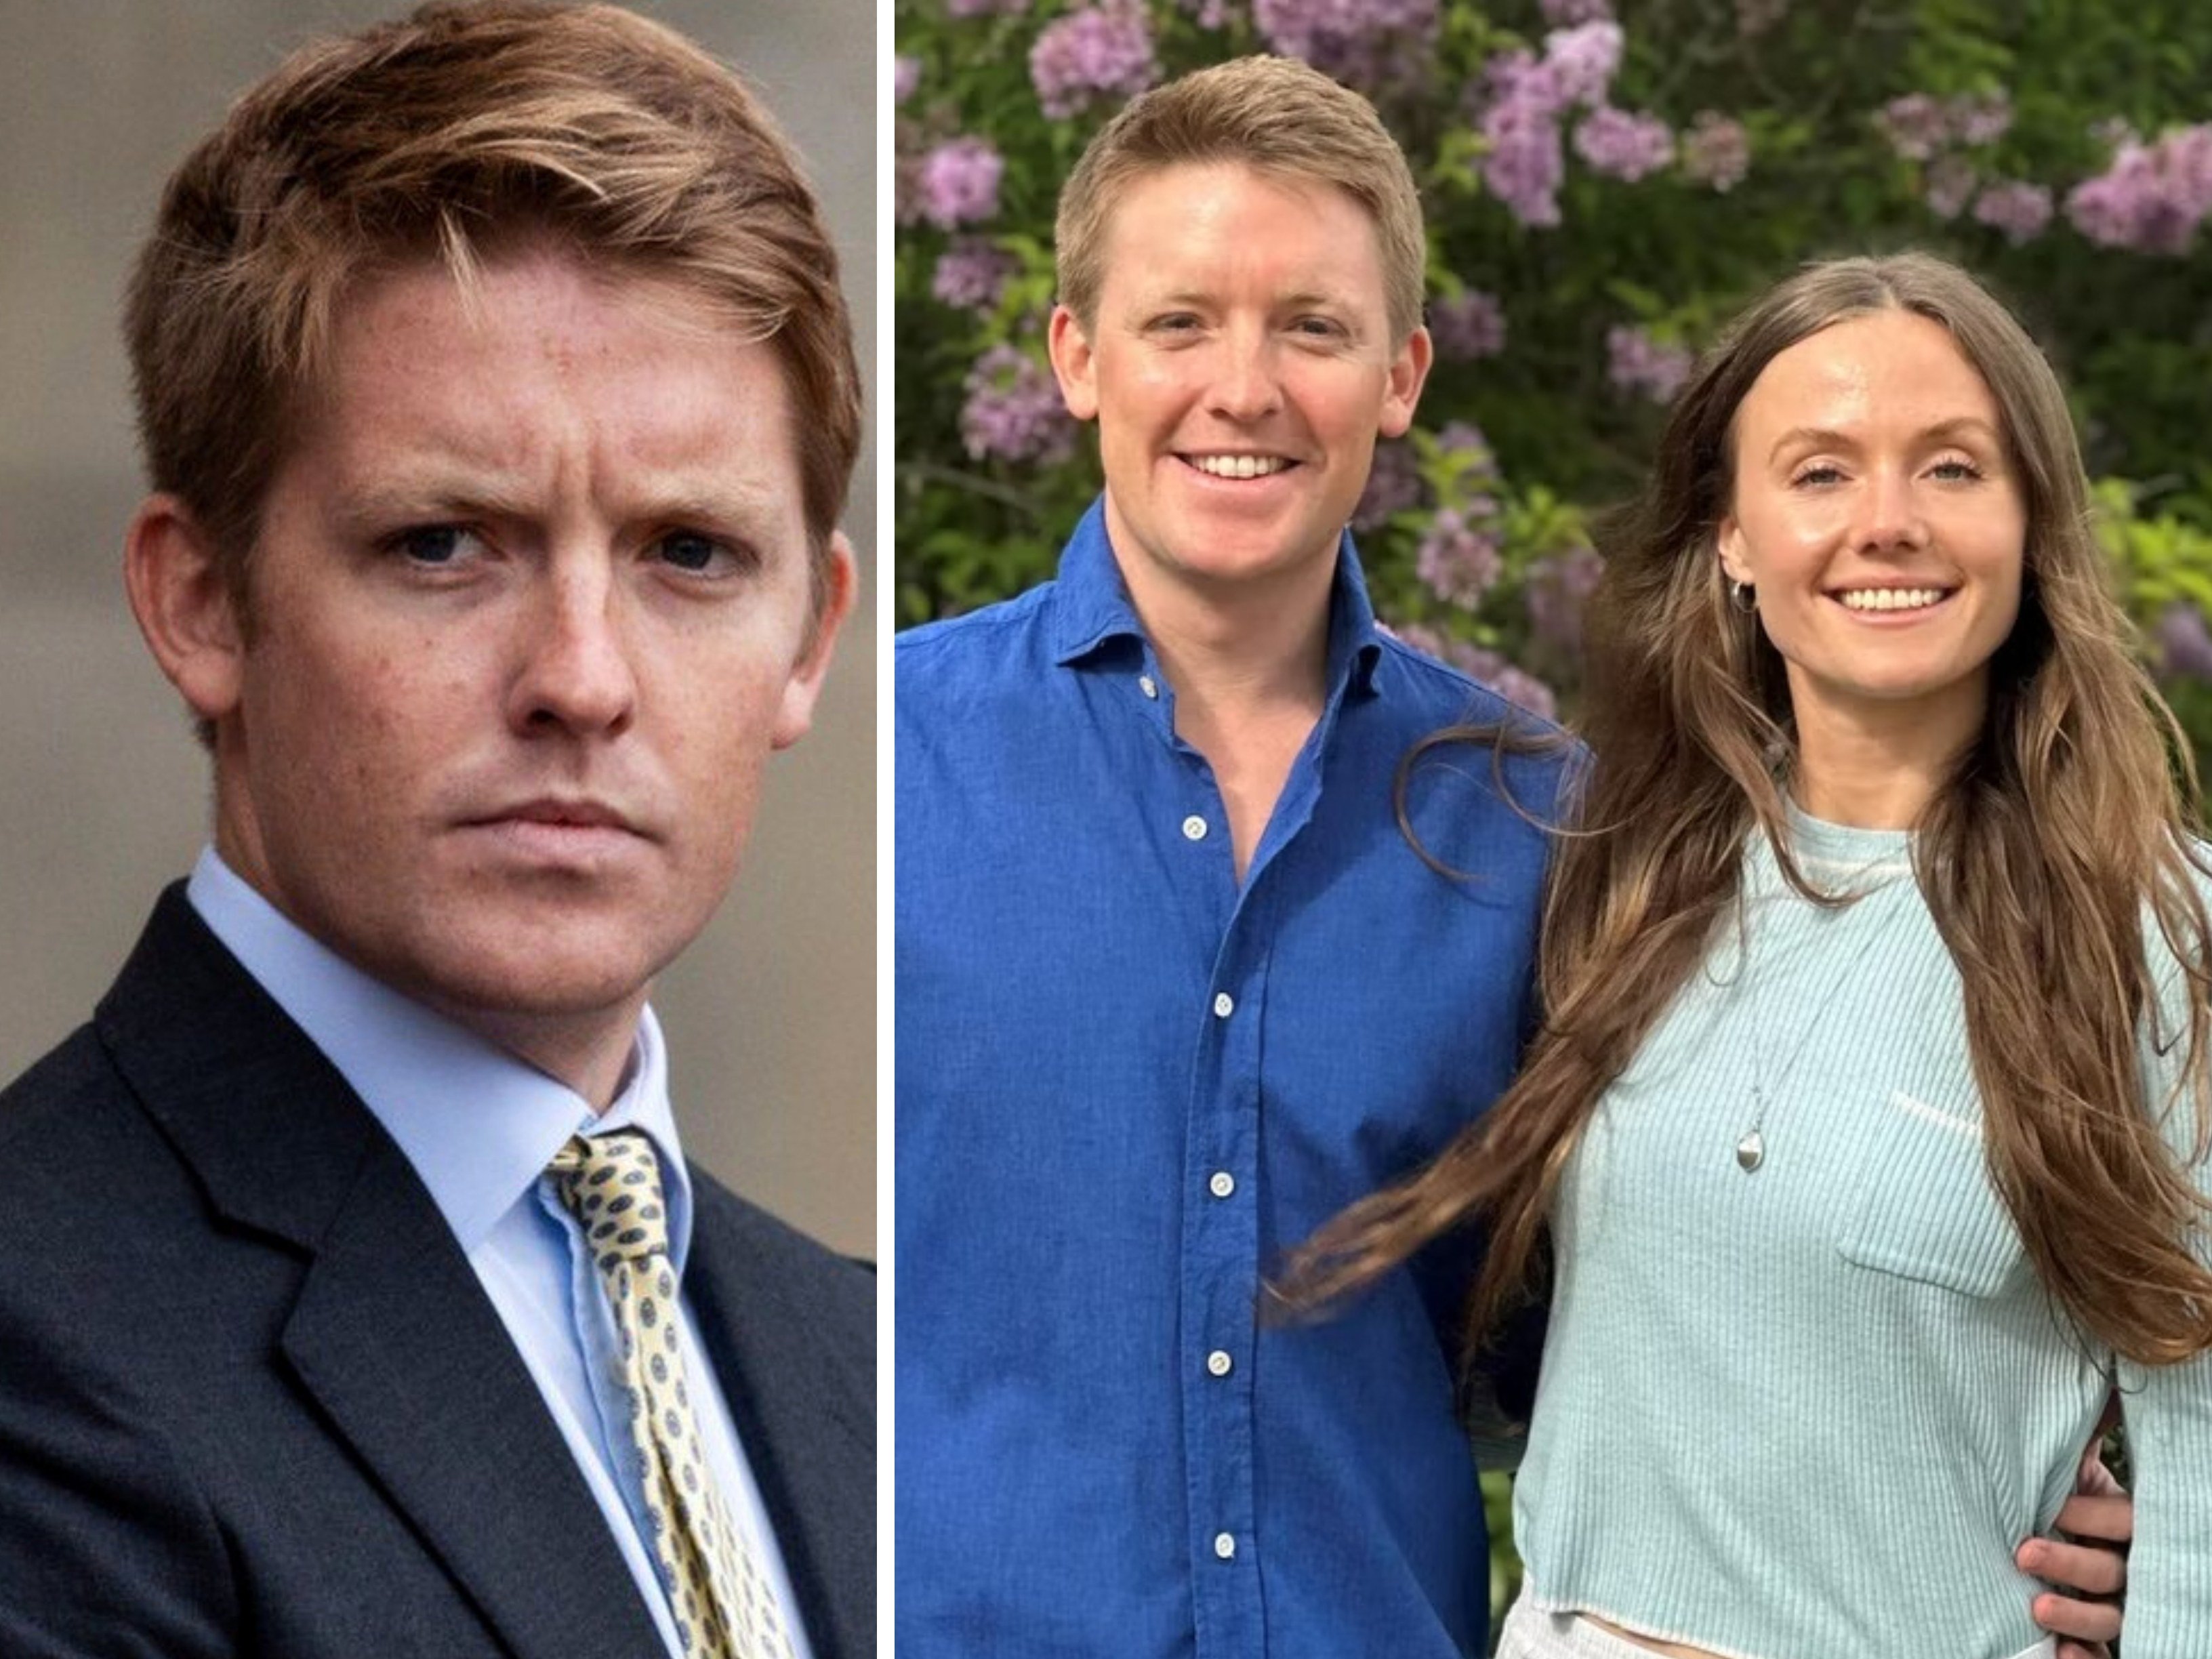 Hugh Grosvenor, the Duke of Westminster, was “born with the longest silver spoon anyone can have” and recently proposed to his girlfriend Olivia Heston (right). Photos: AP